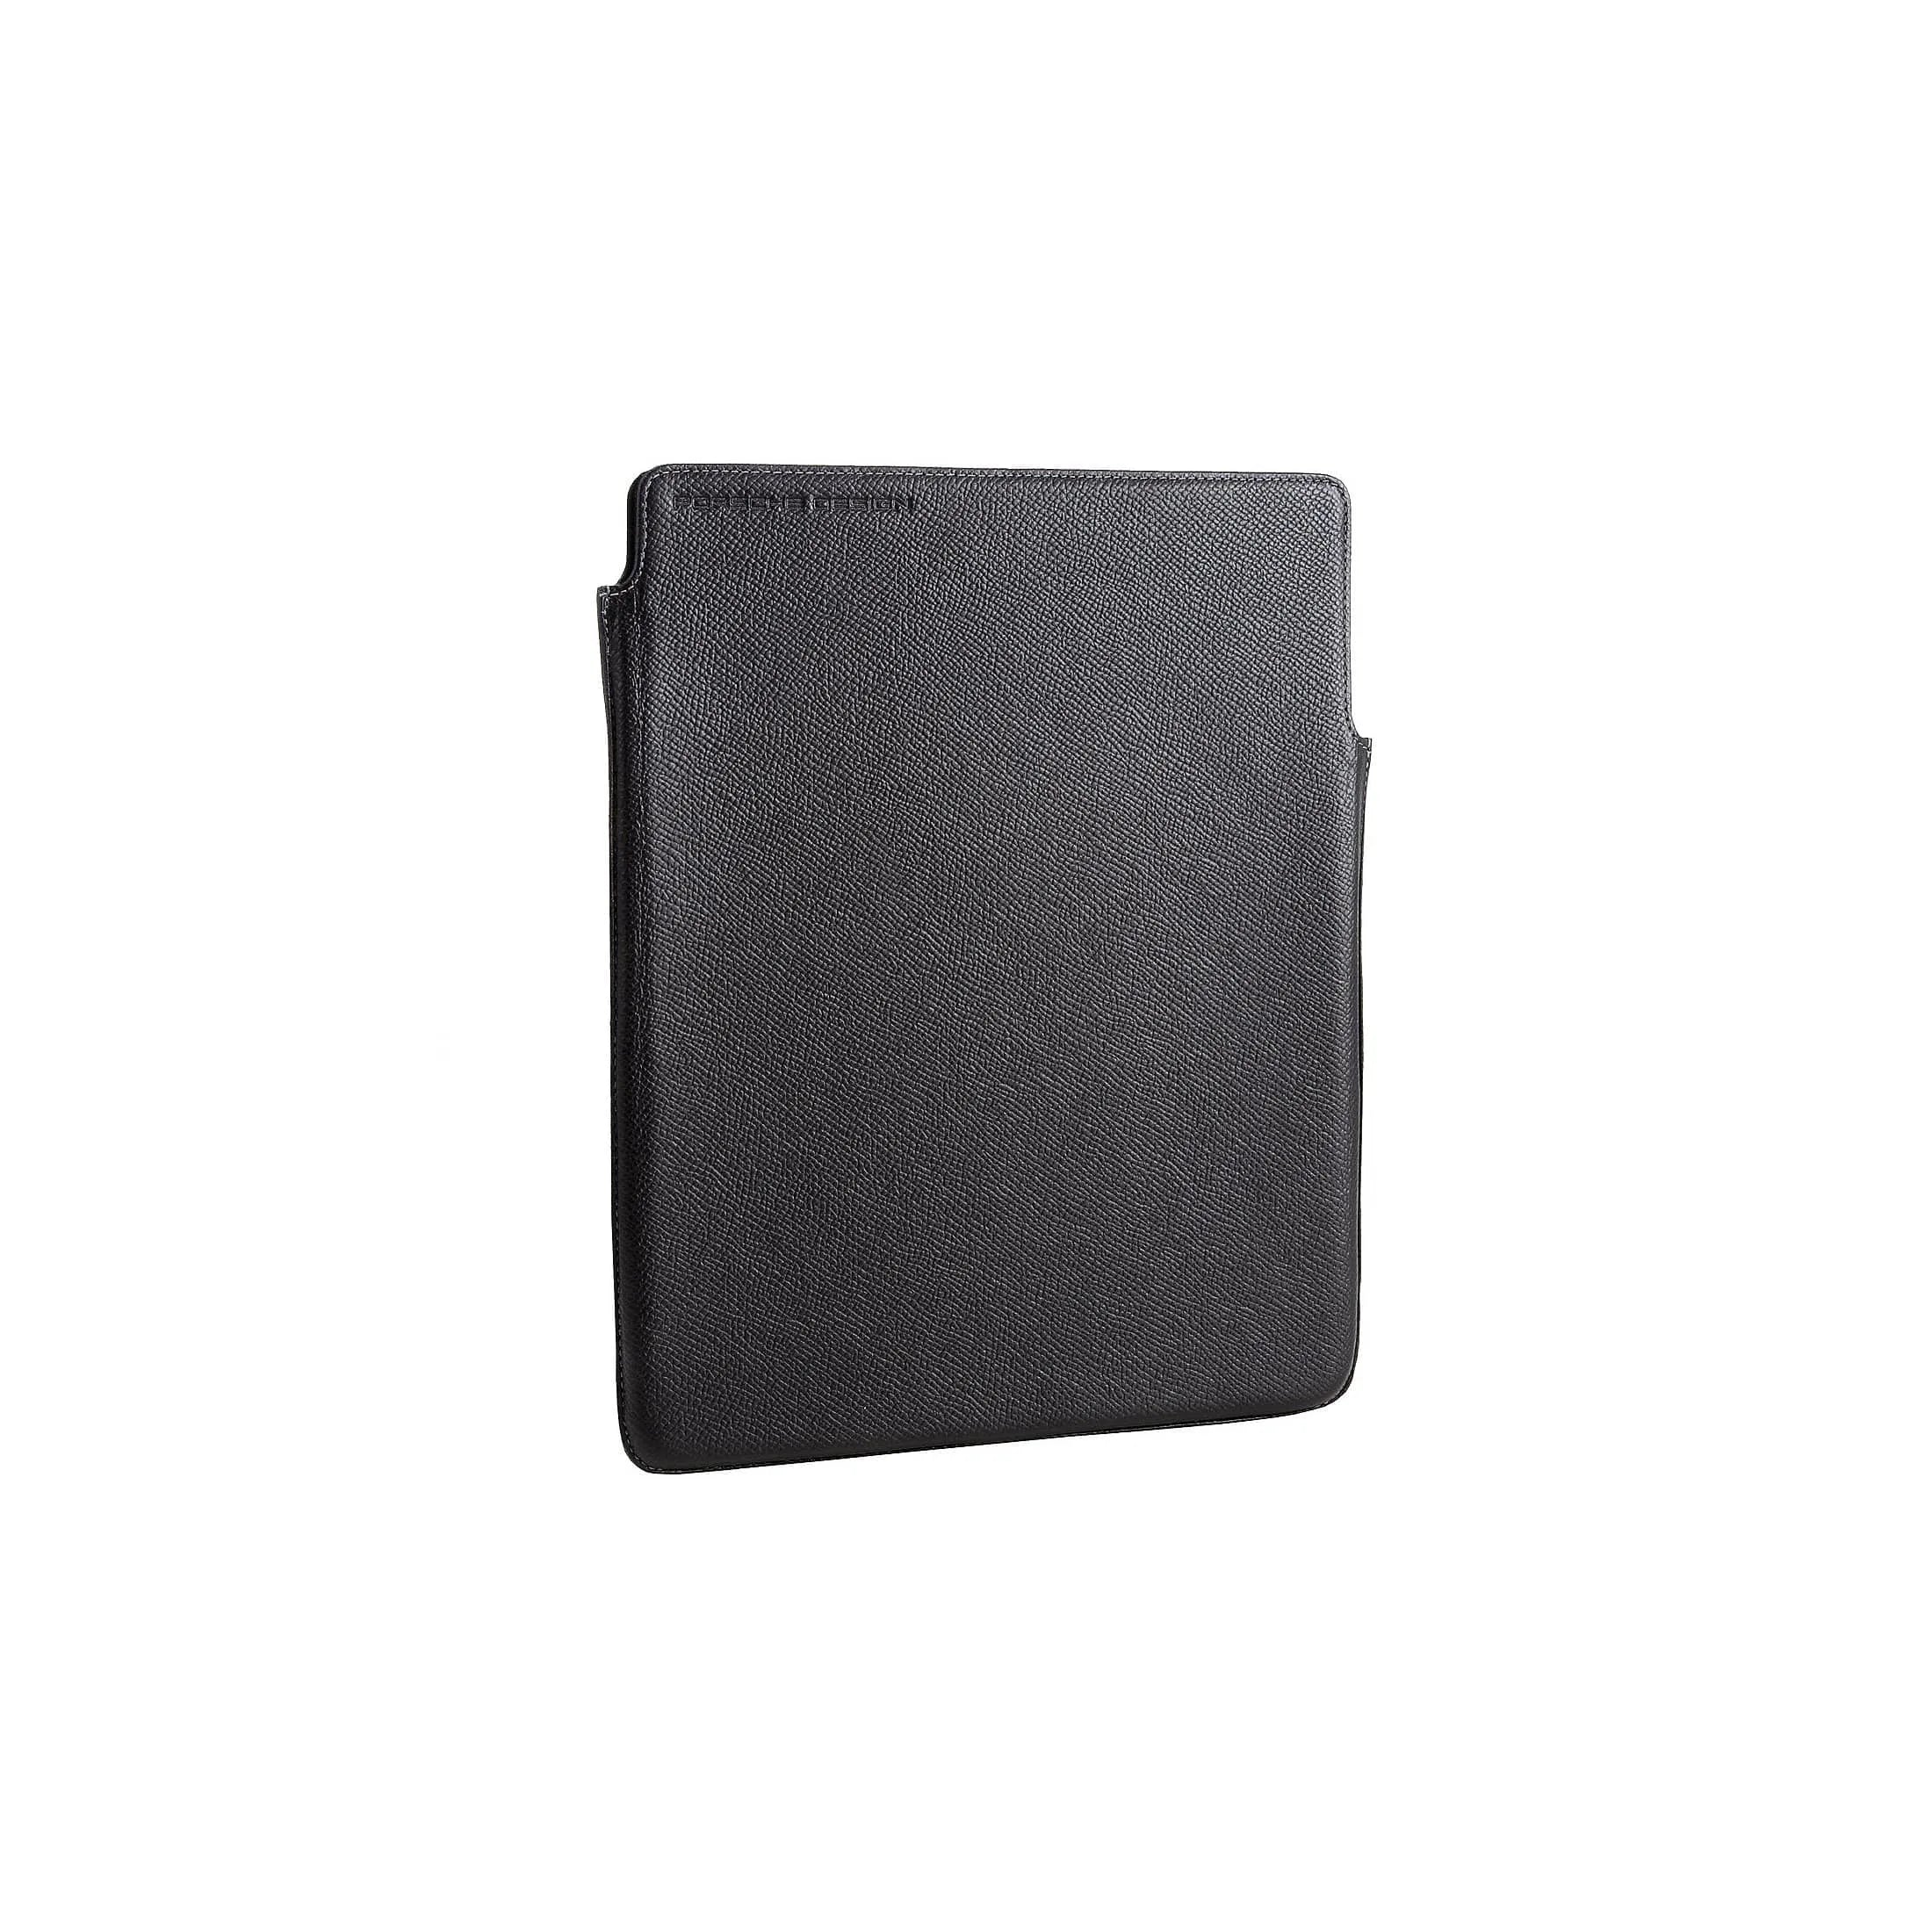 Porsche Design French Classic Case for IPad made of leather - dark gray